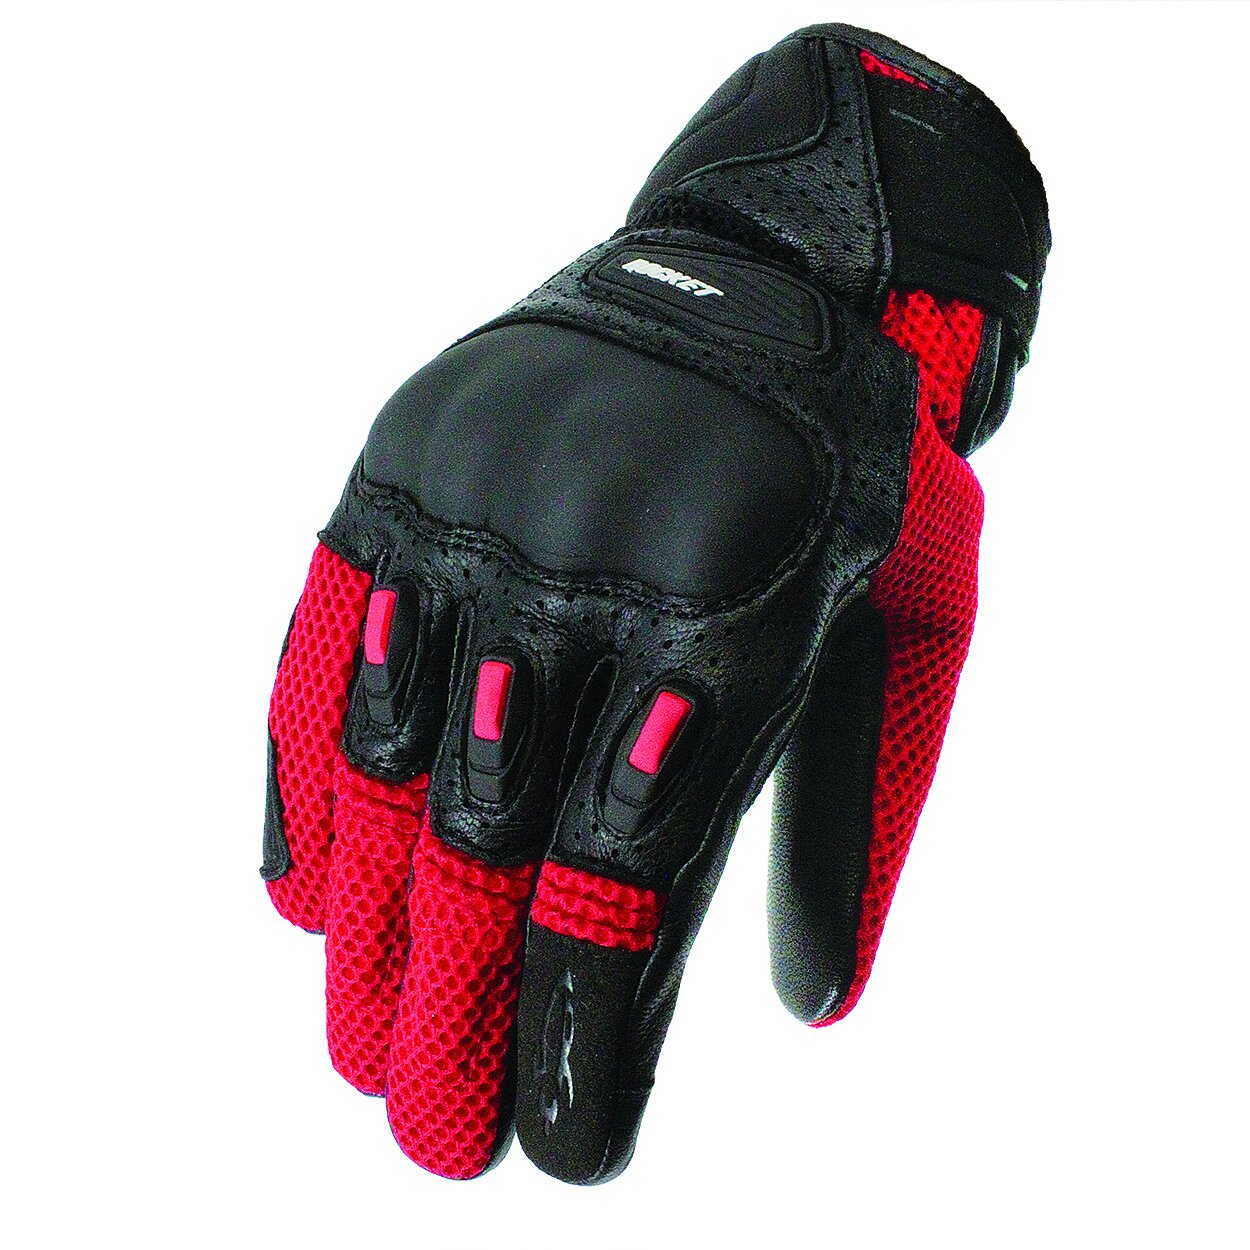 Joe Rocket Crew Touch Mens Motorcycle Riding Gloves Red/Black, Small 